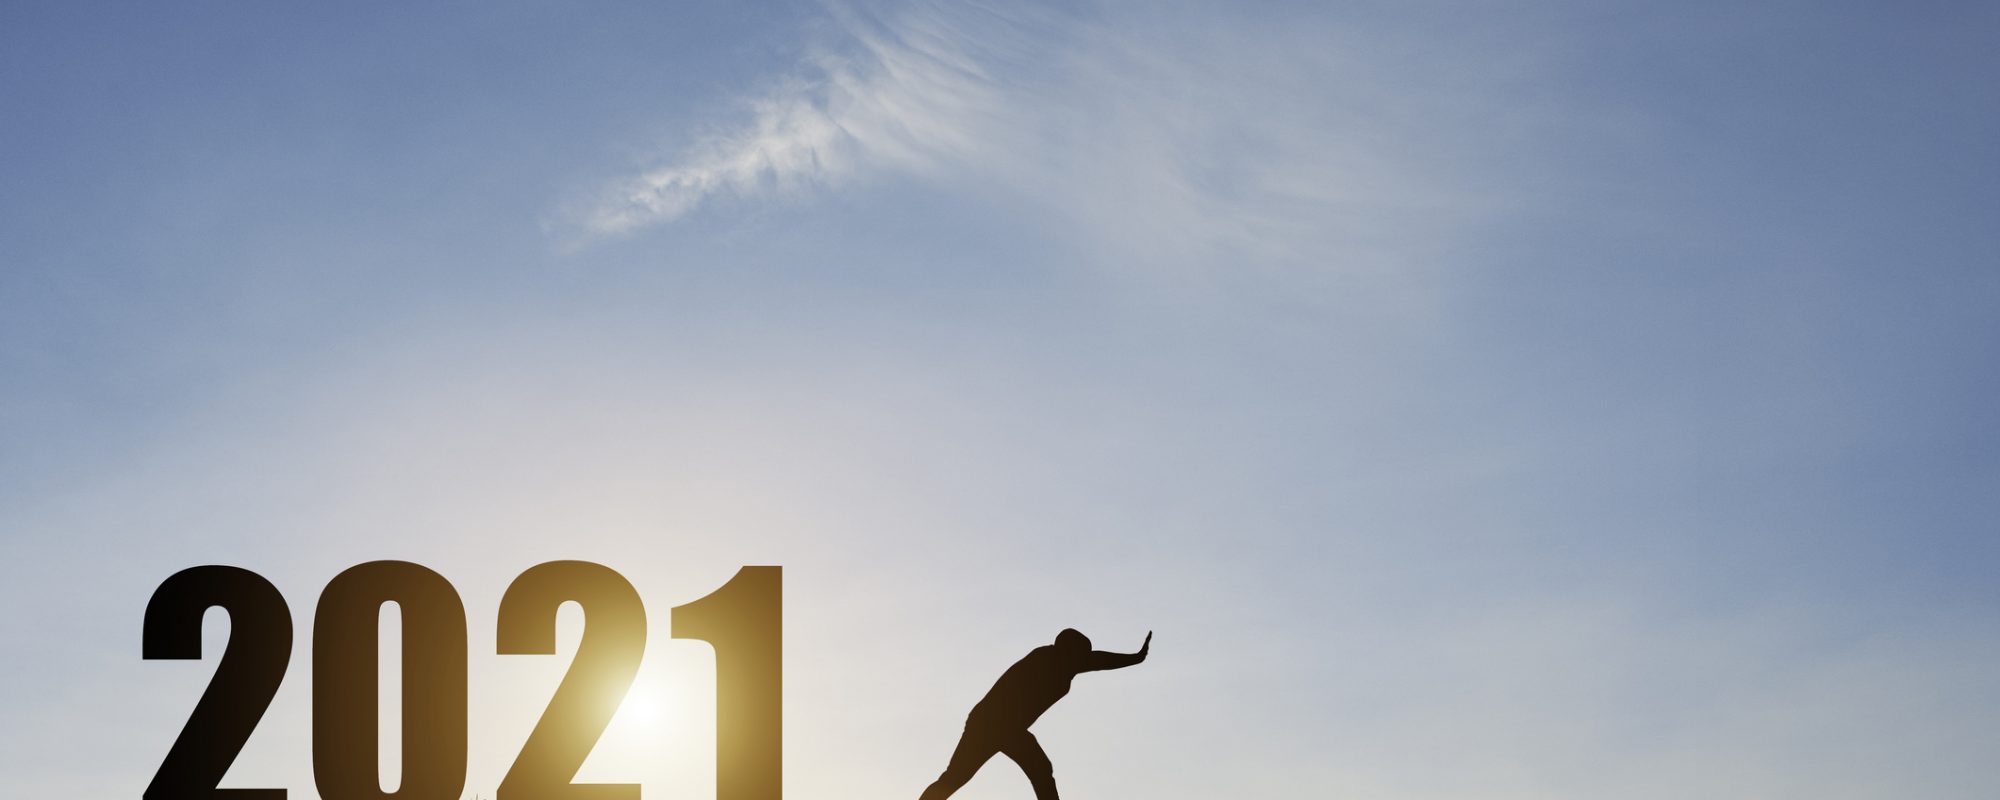 Man push number zero down the cliff where has the number 2021 with blue sky and sunrise. It is symbol of starting and welcome happy new year 2021.